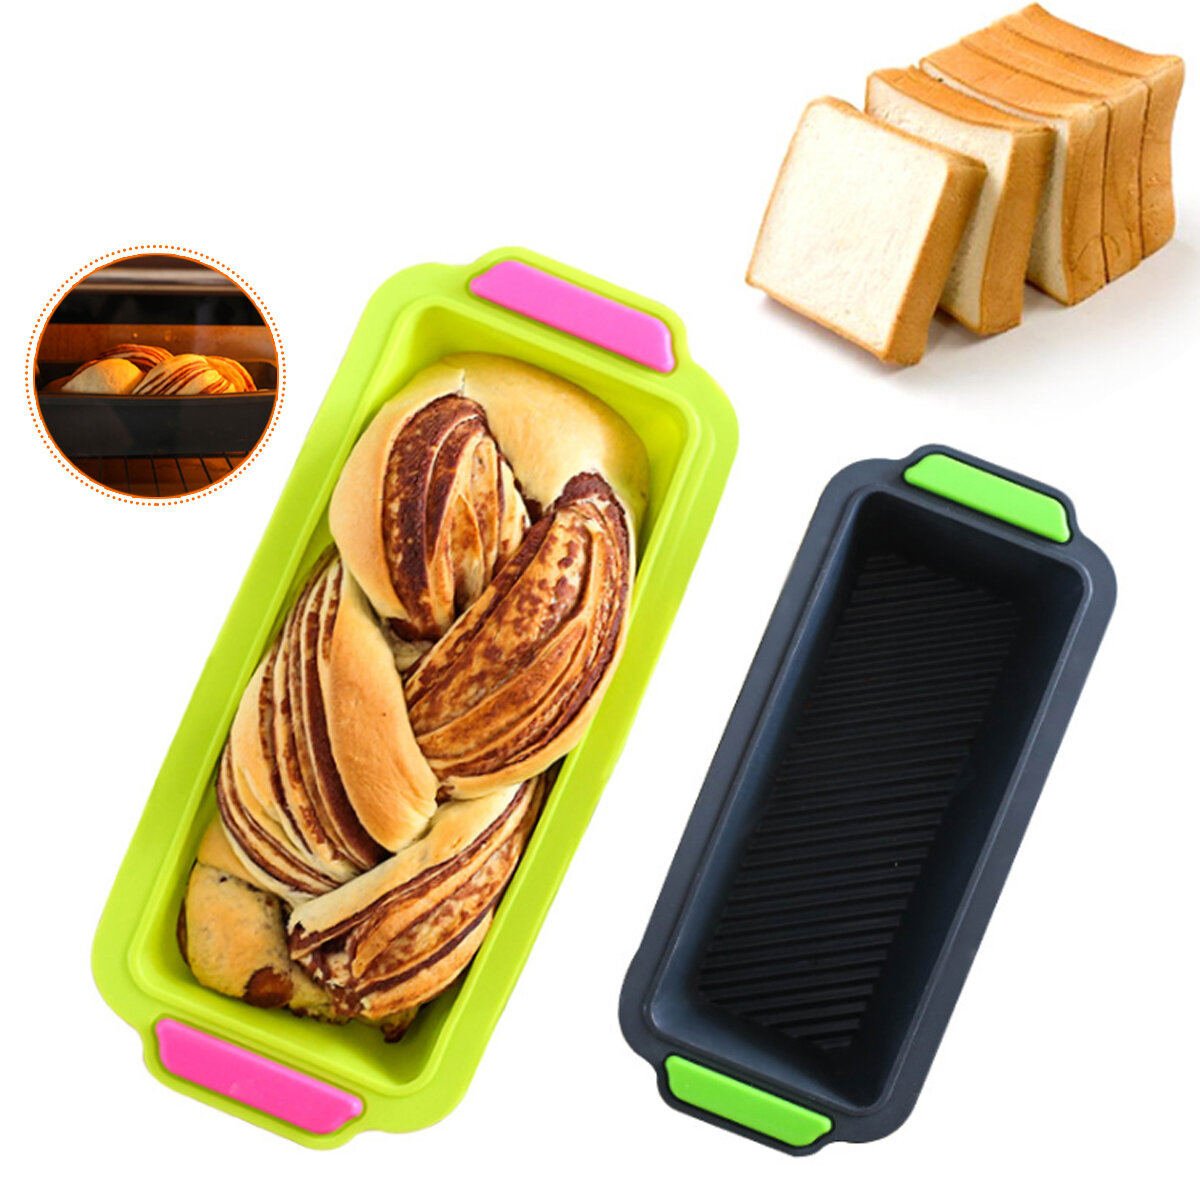 29.2x12.8x6.2cm Silicone Cake Mold DIY Non-stick Bread Toast Mould Loaf Pastry Baking Mold Bakeware